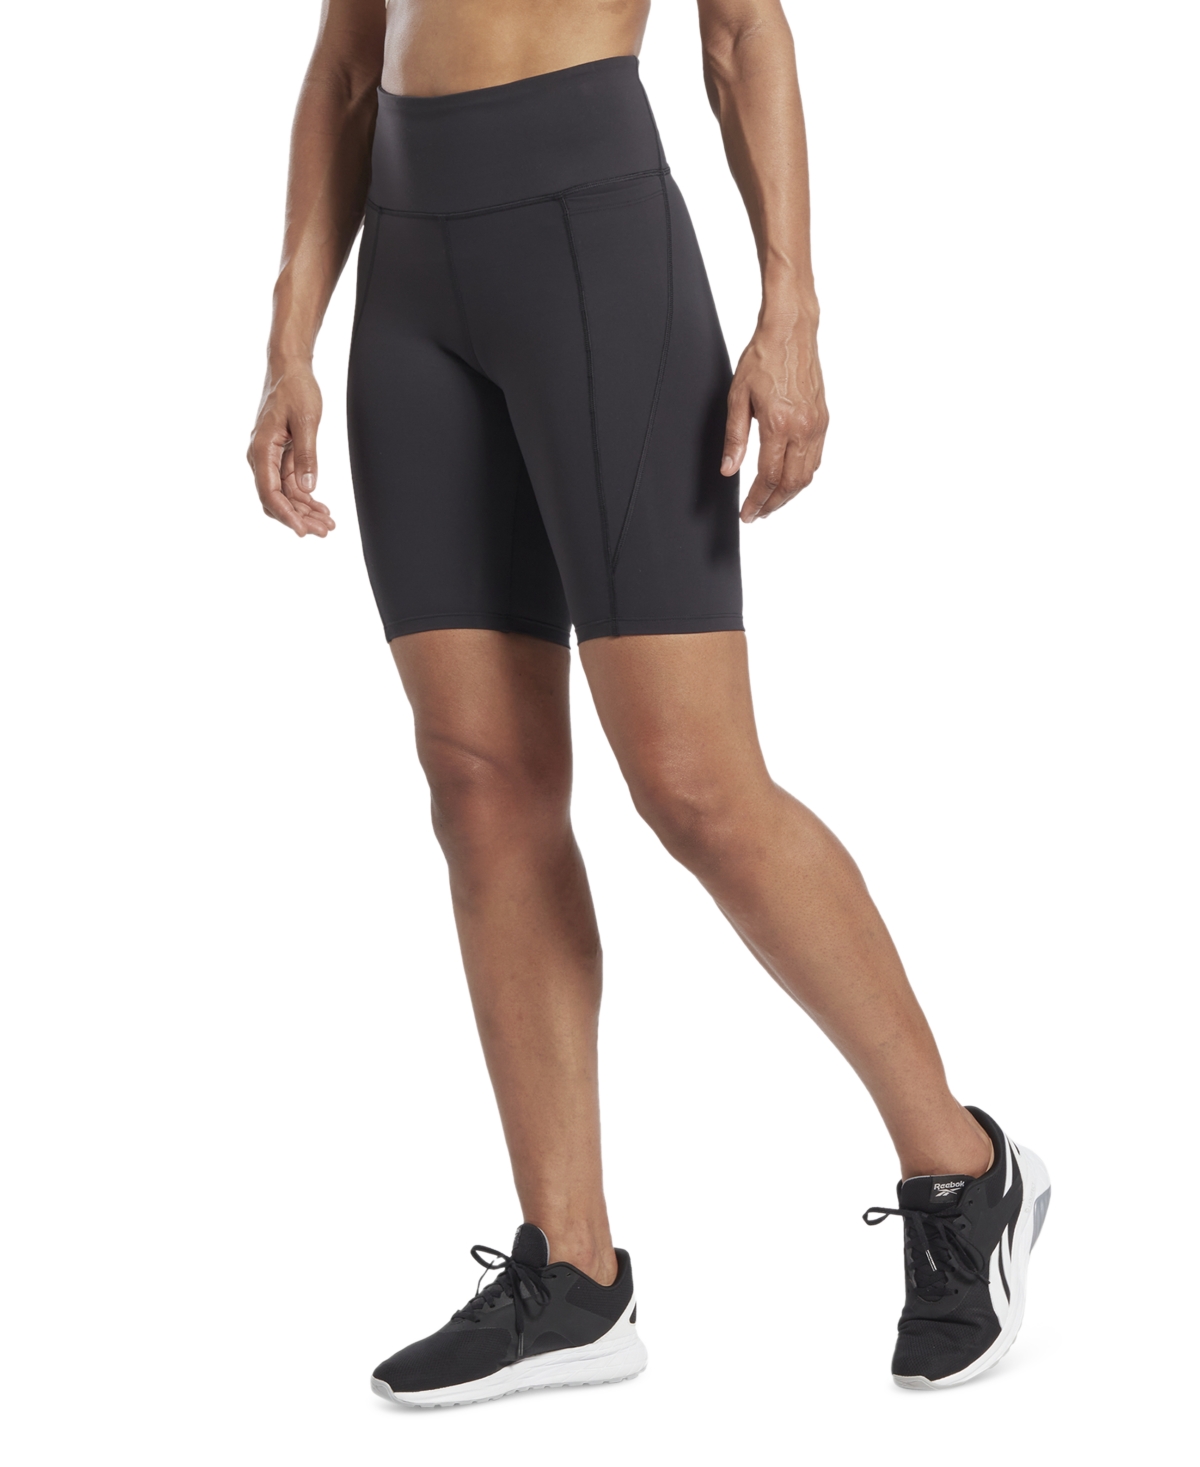 Reebok Women's Lux High-rise Pull-on Bike Shorts, A Macy's Exclusive In Black